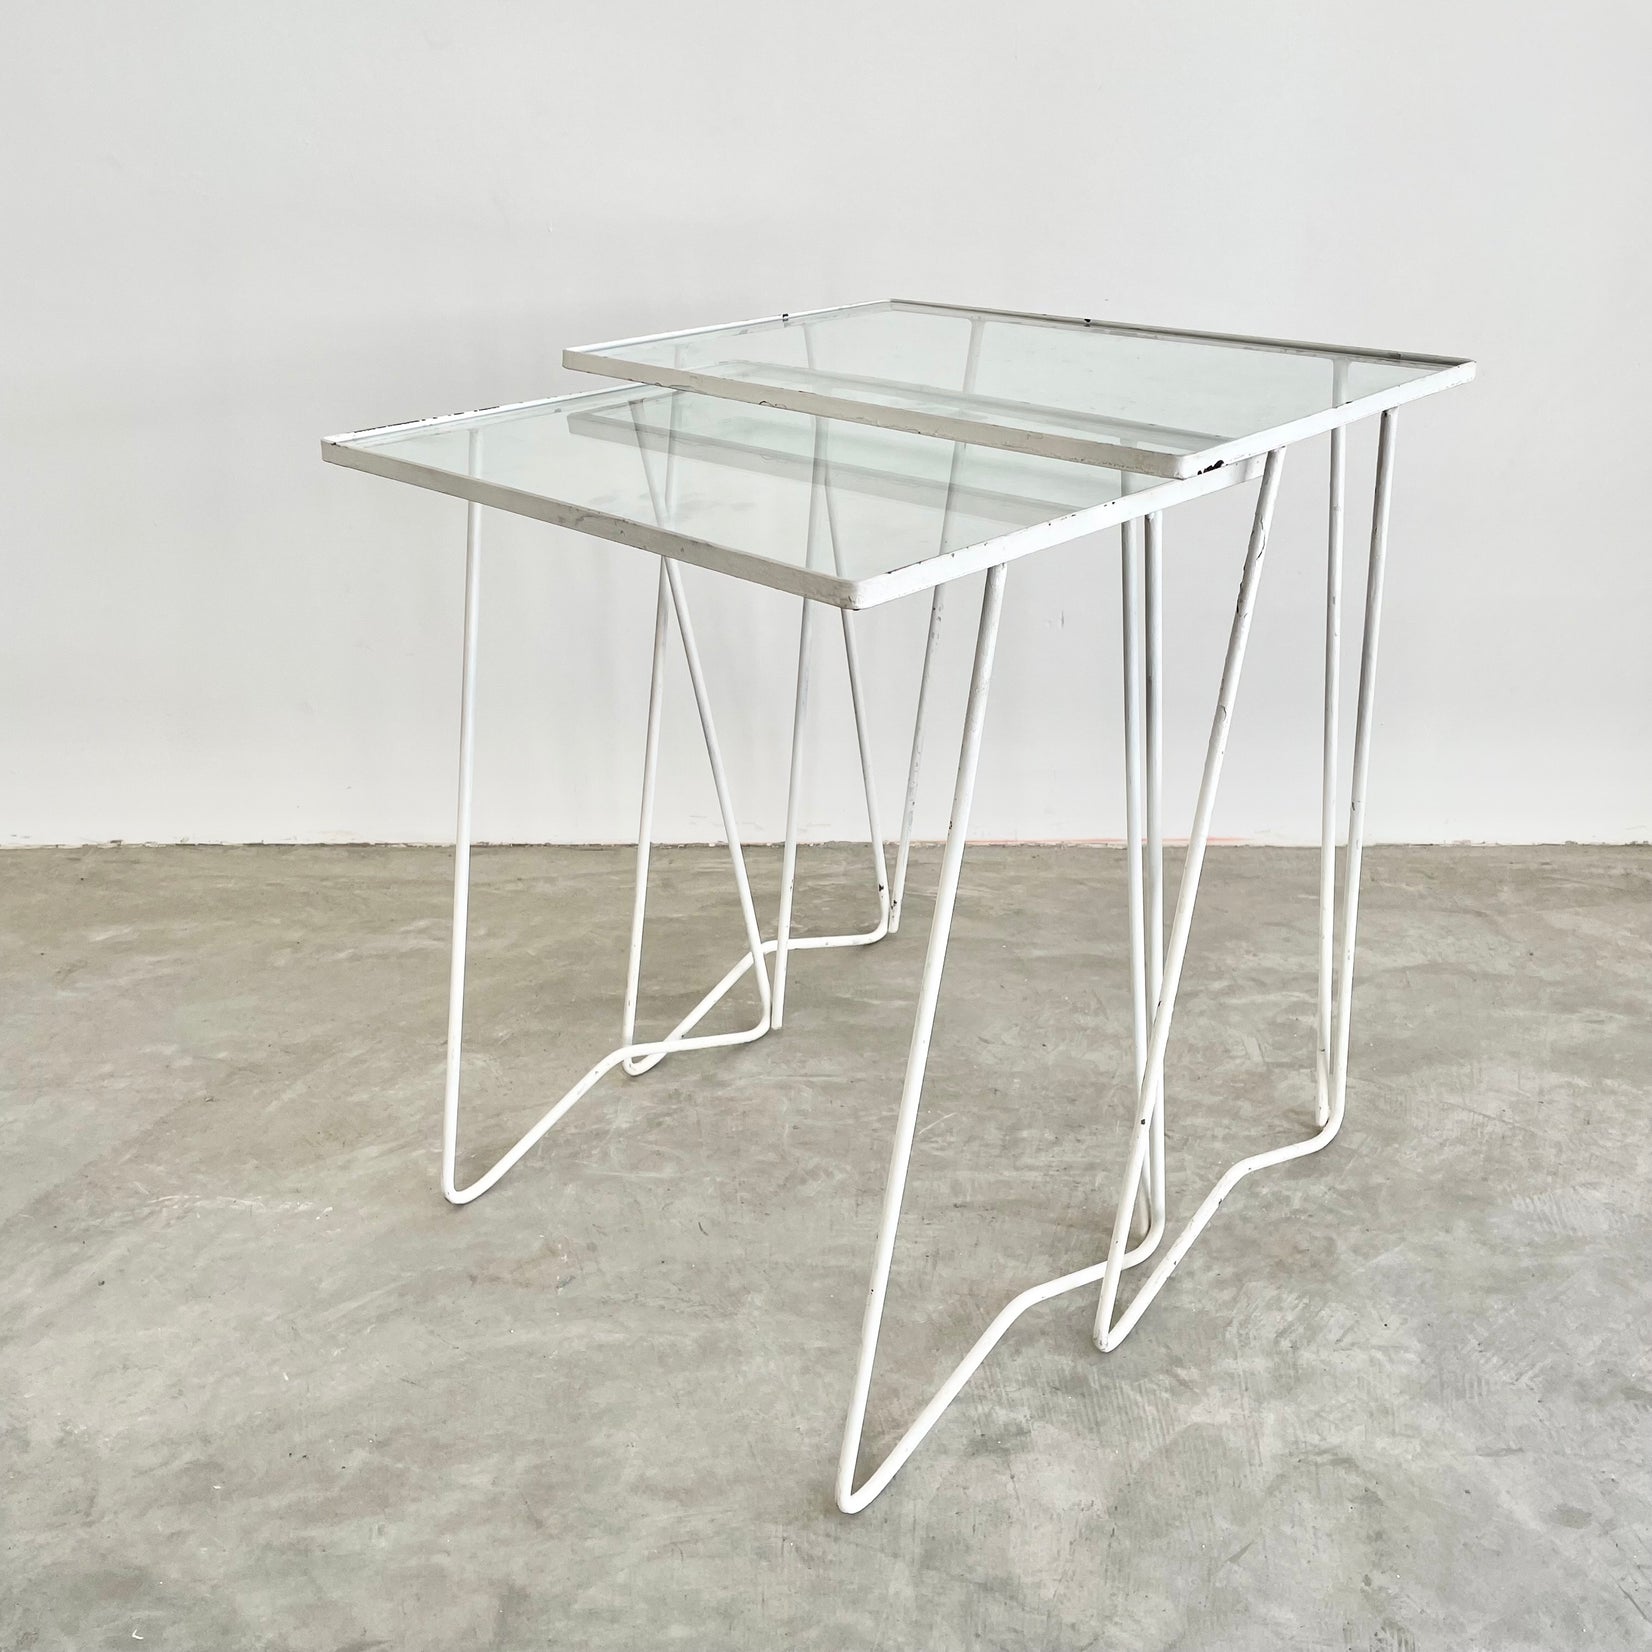 Pair of Iron and Glass Nesting Tables, 1970s USA